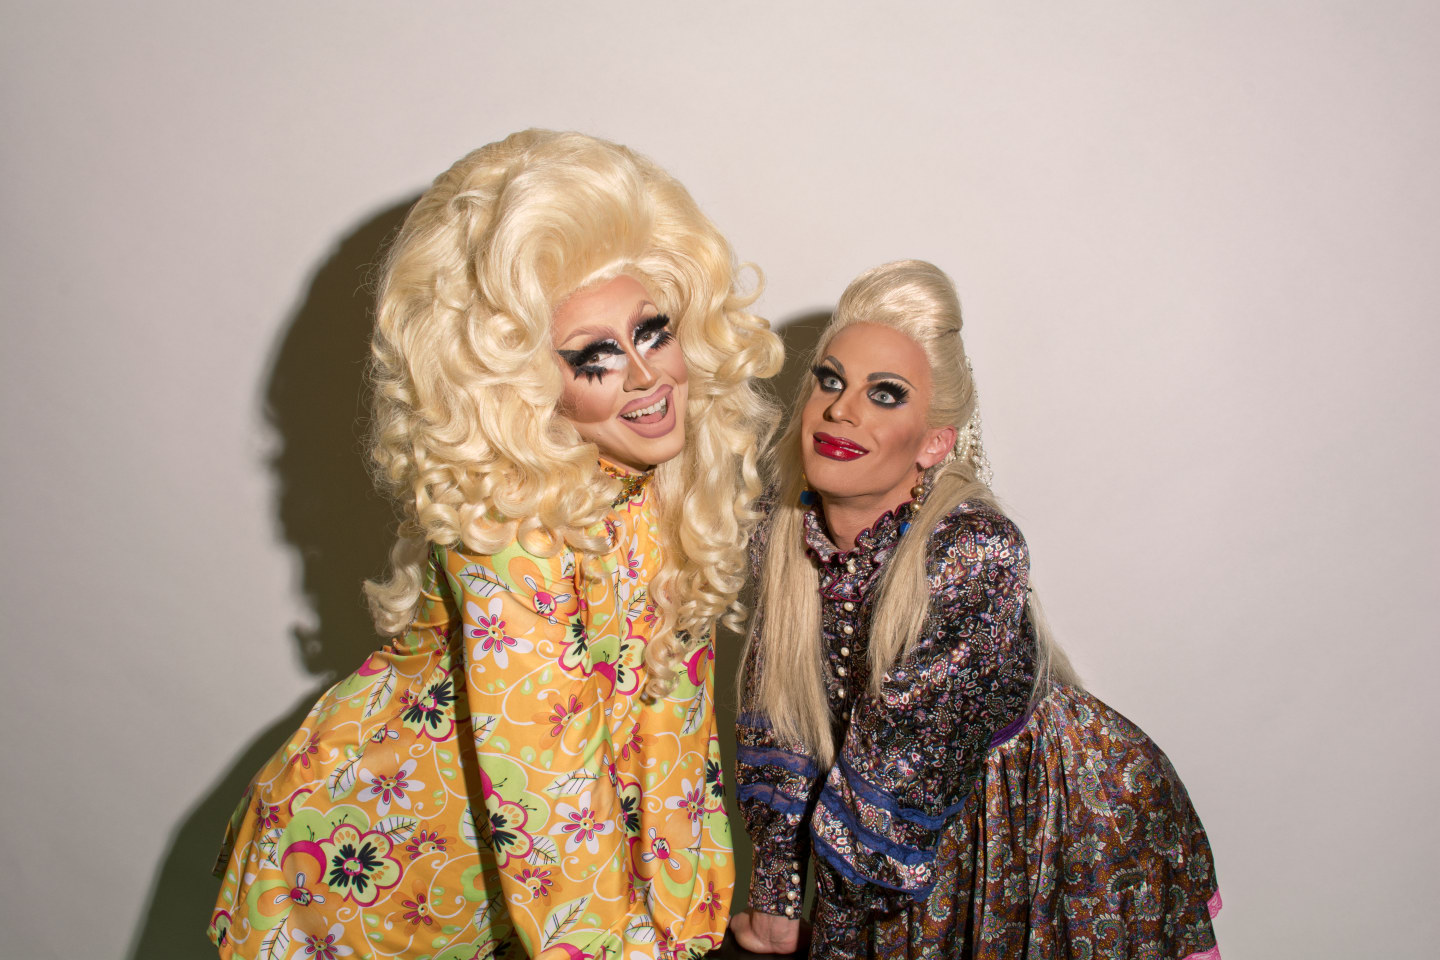 Trixie and Katya are out of their minds and they’re going to take over the world